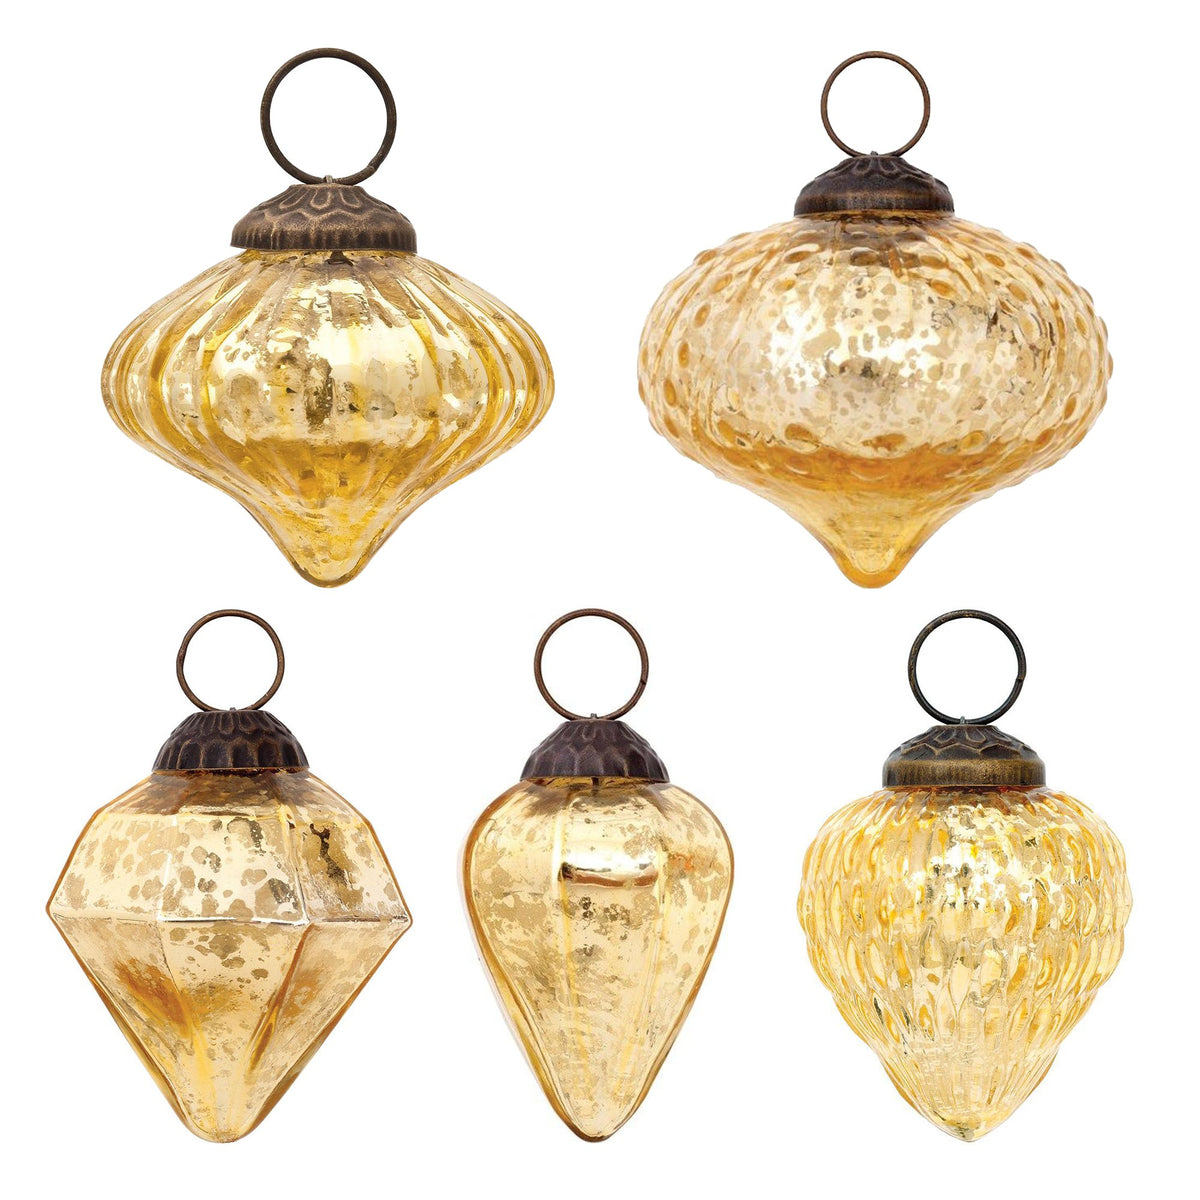 5 Pack | Gold Vintage Romance Assorted Ornaments Set - Great Gift Idea, Vintage-Style Decorations for Christmas, Special Occasions, Home Decor and Parties